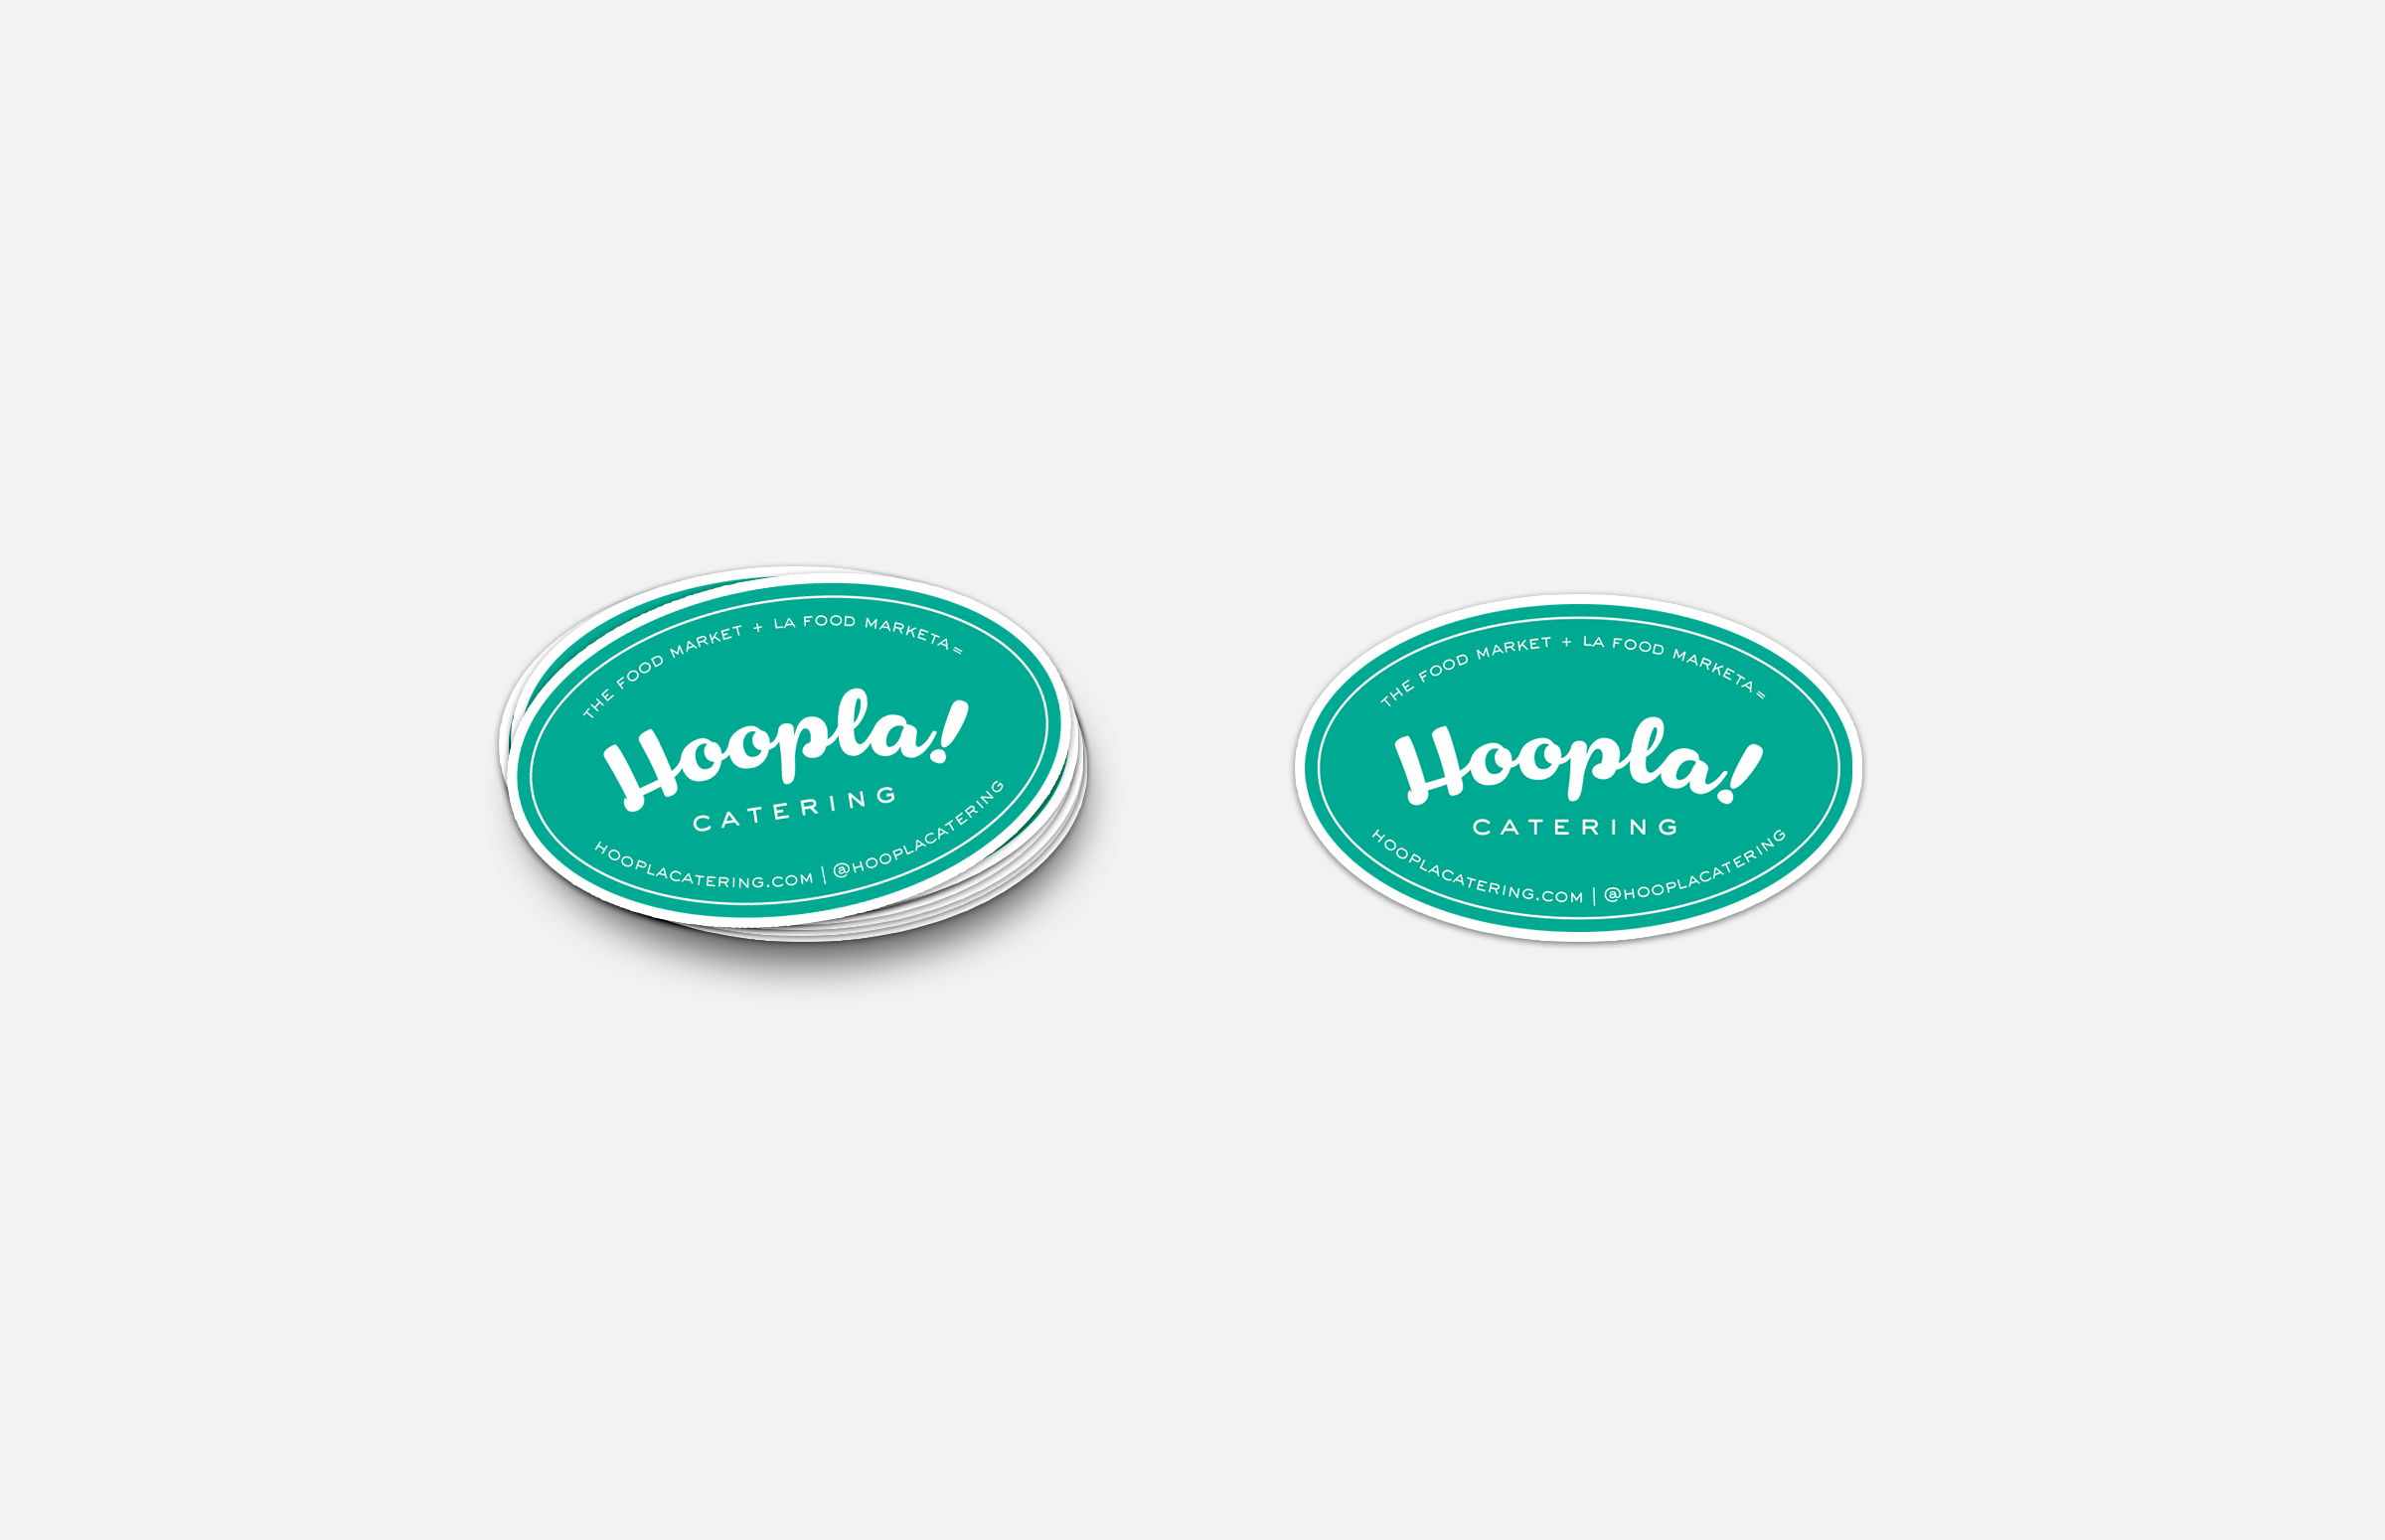 Hoopla! Catering: Oval Sticker Design